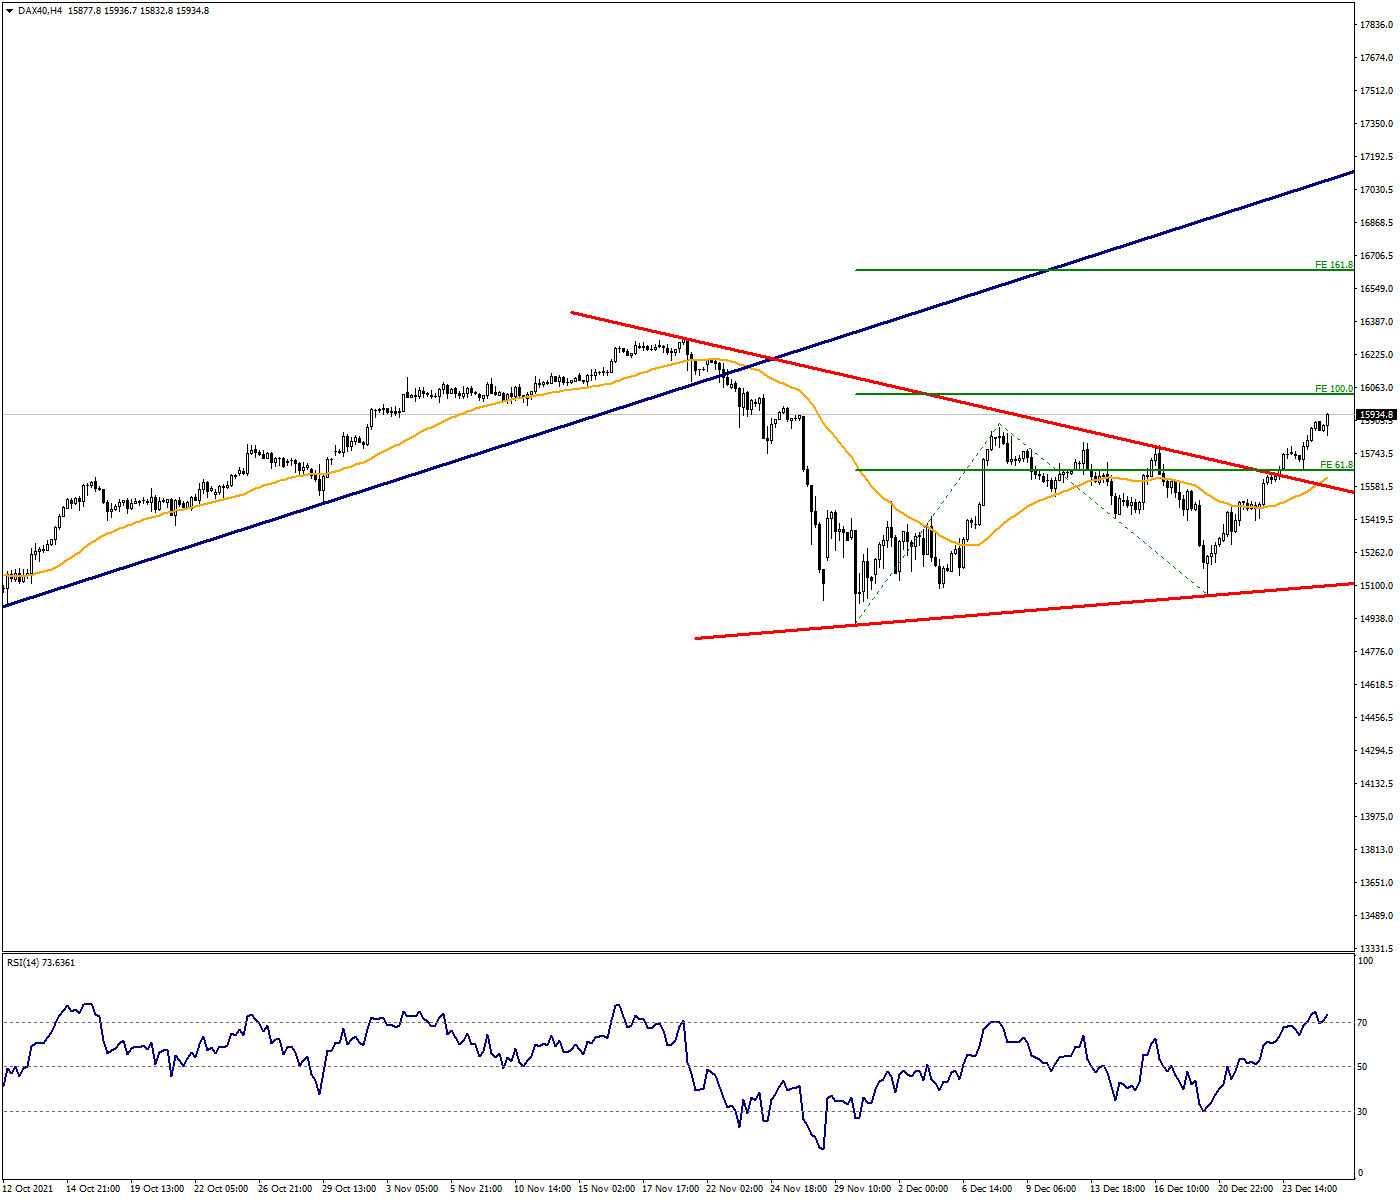 DAX40 targeted record highs